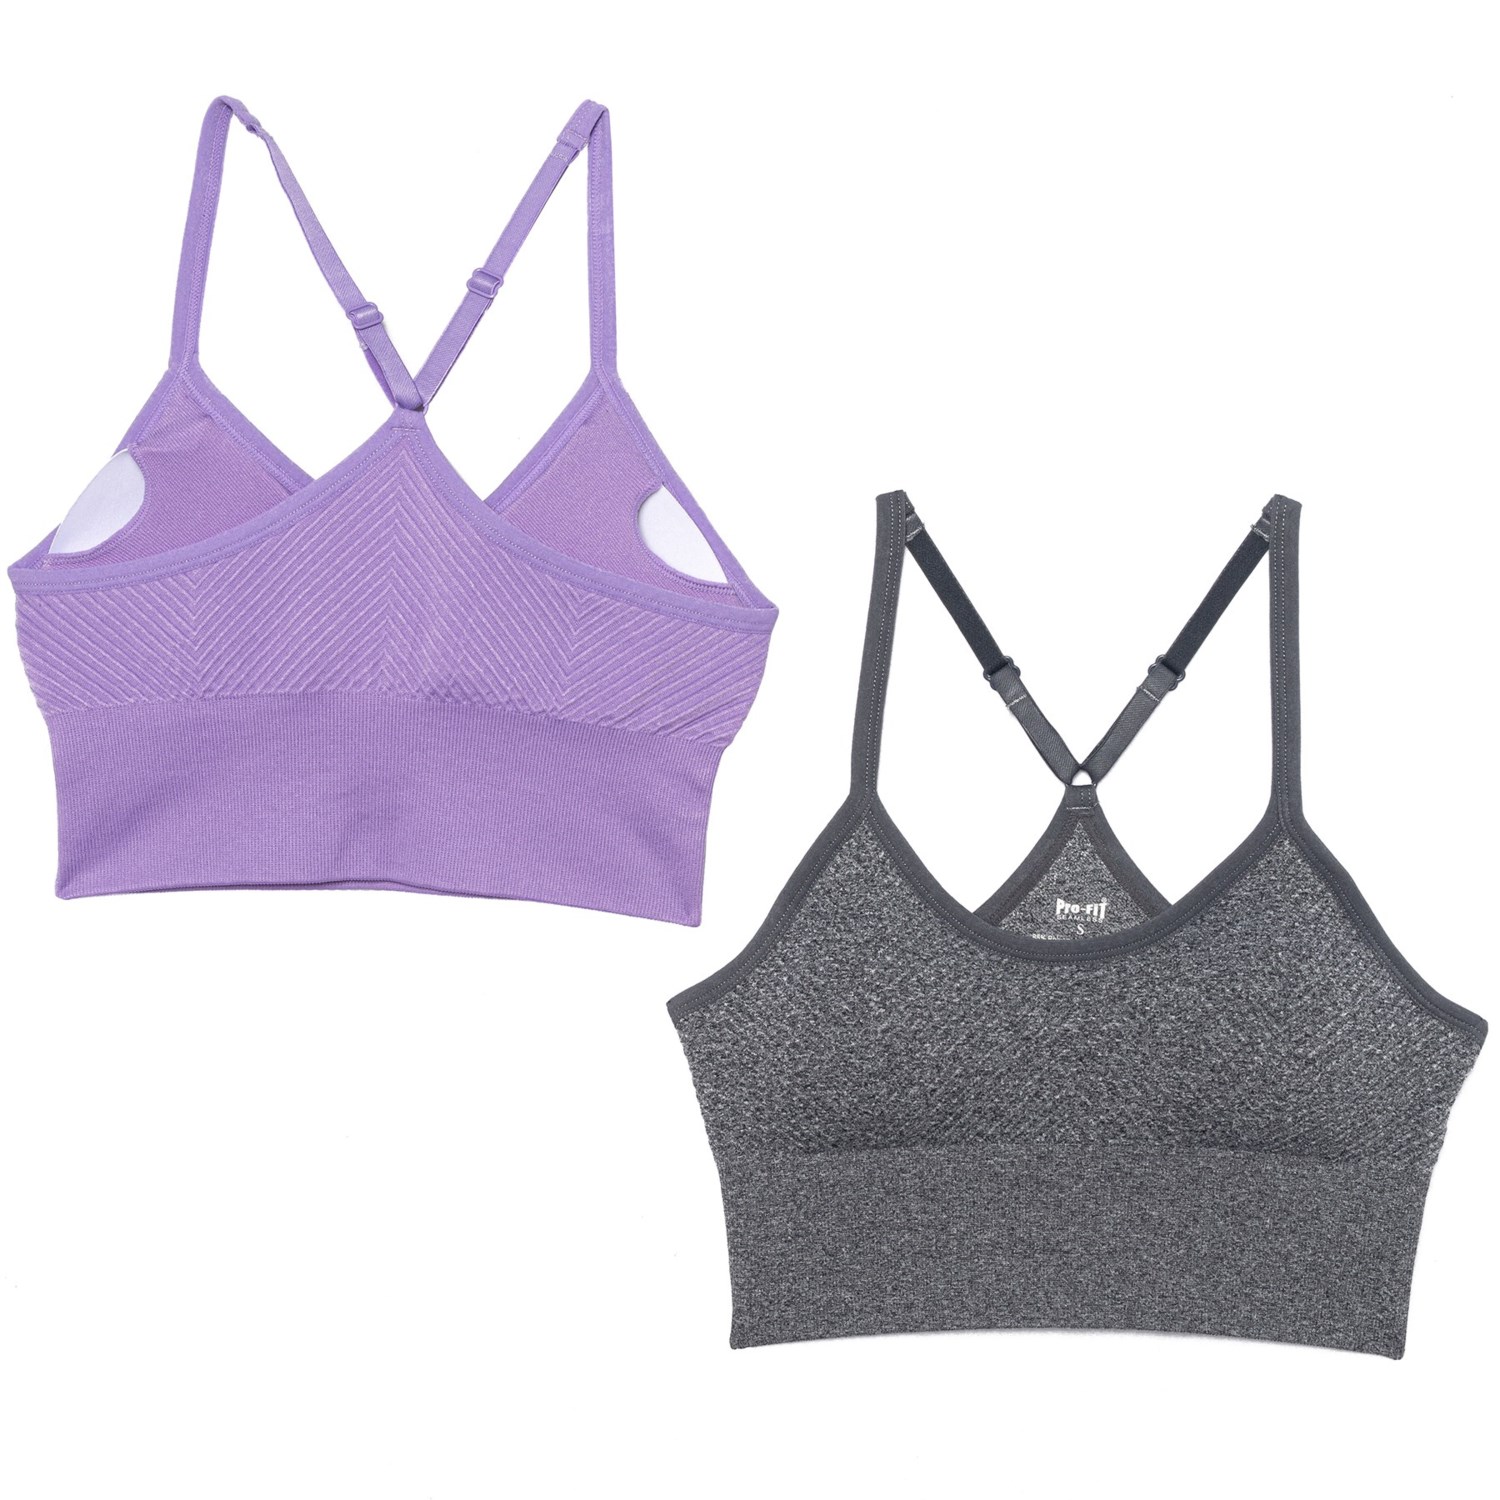 Pro-Fit Seamless Ribbed Racerback Short Sports Bra (For Women) - Save 65%